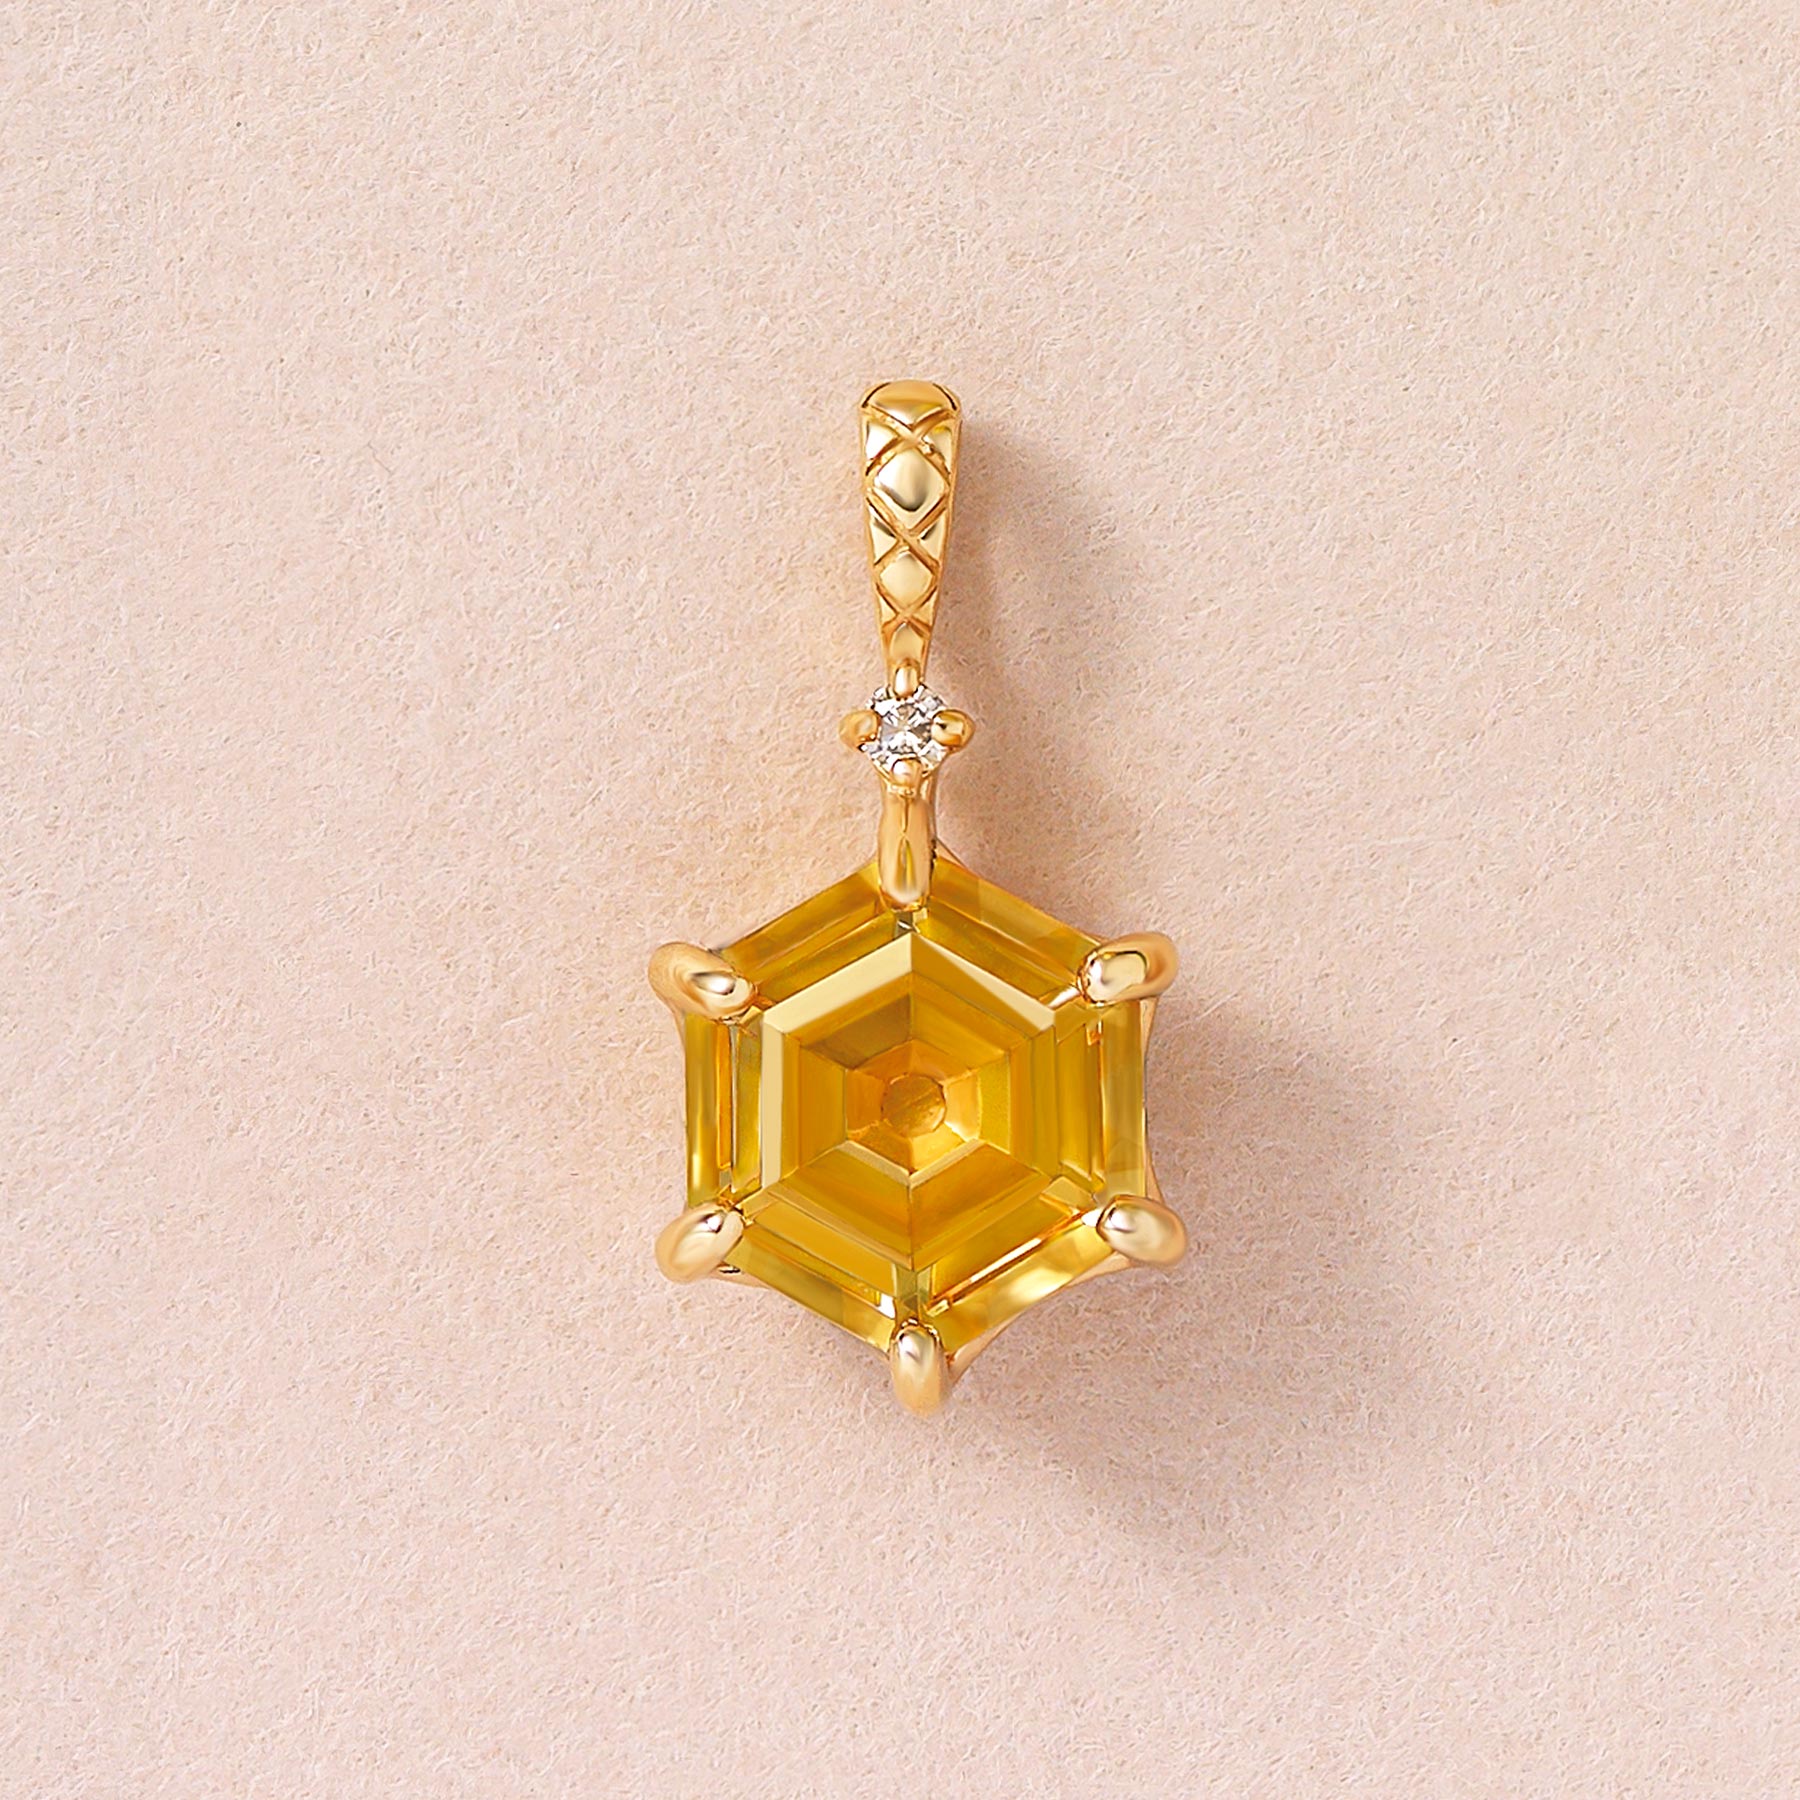 [GARDEN] 10K Citrine Honeycomb Necklace Charm (Yellow Gold) - Product Image